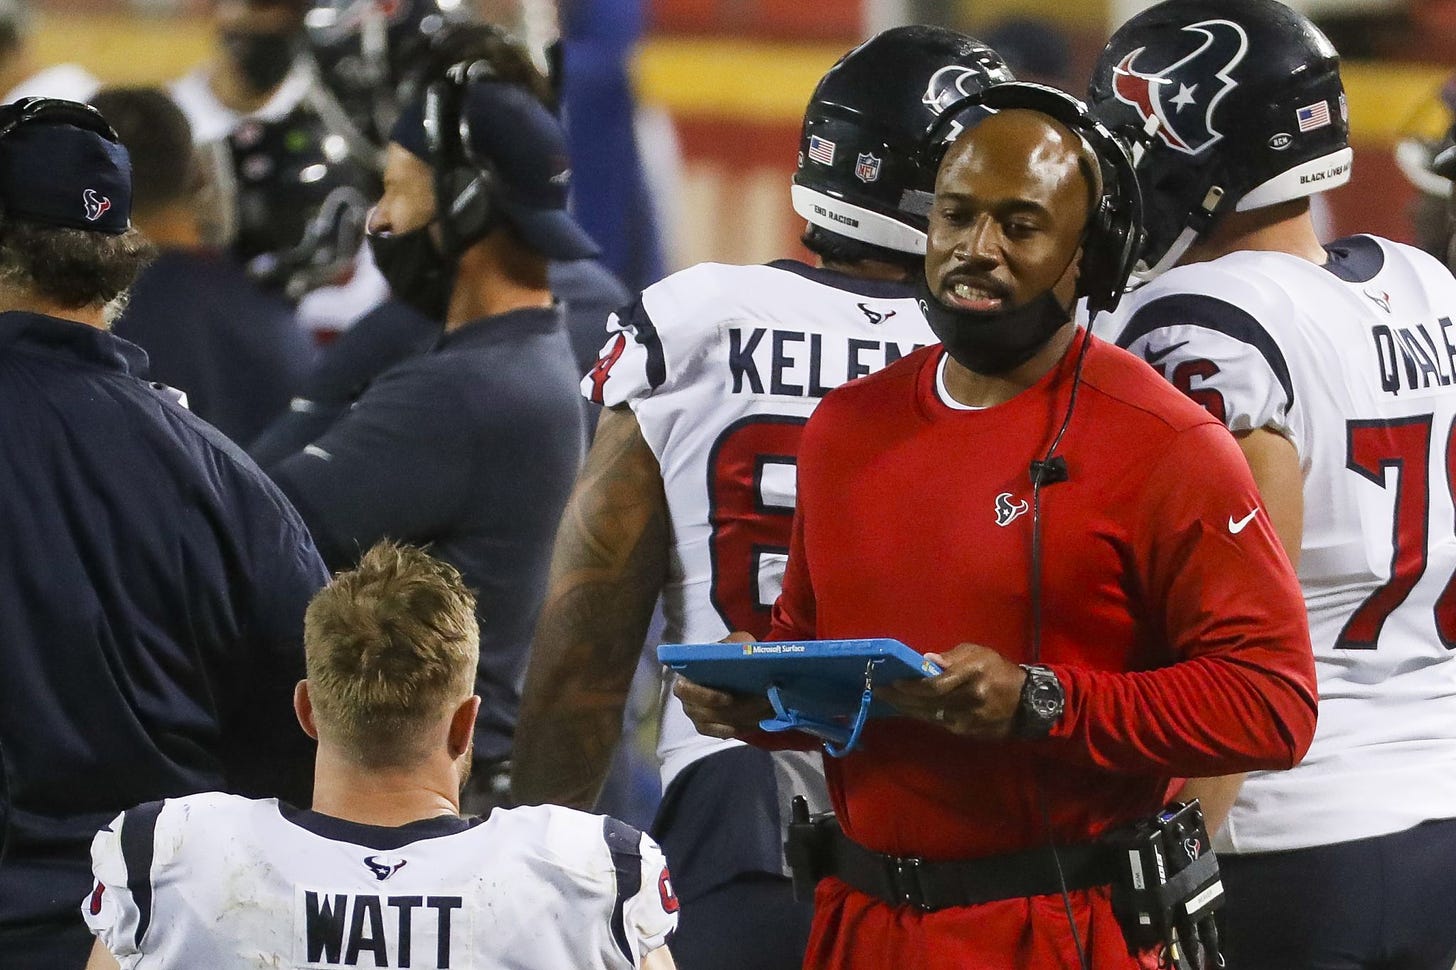 McClain: Texans' Anthony Weaver must adapt quickly after COVID issues